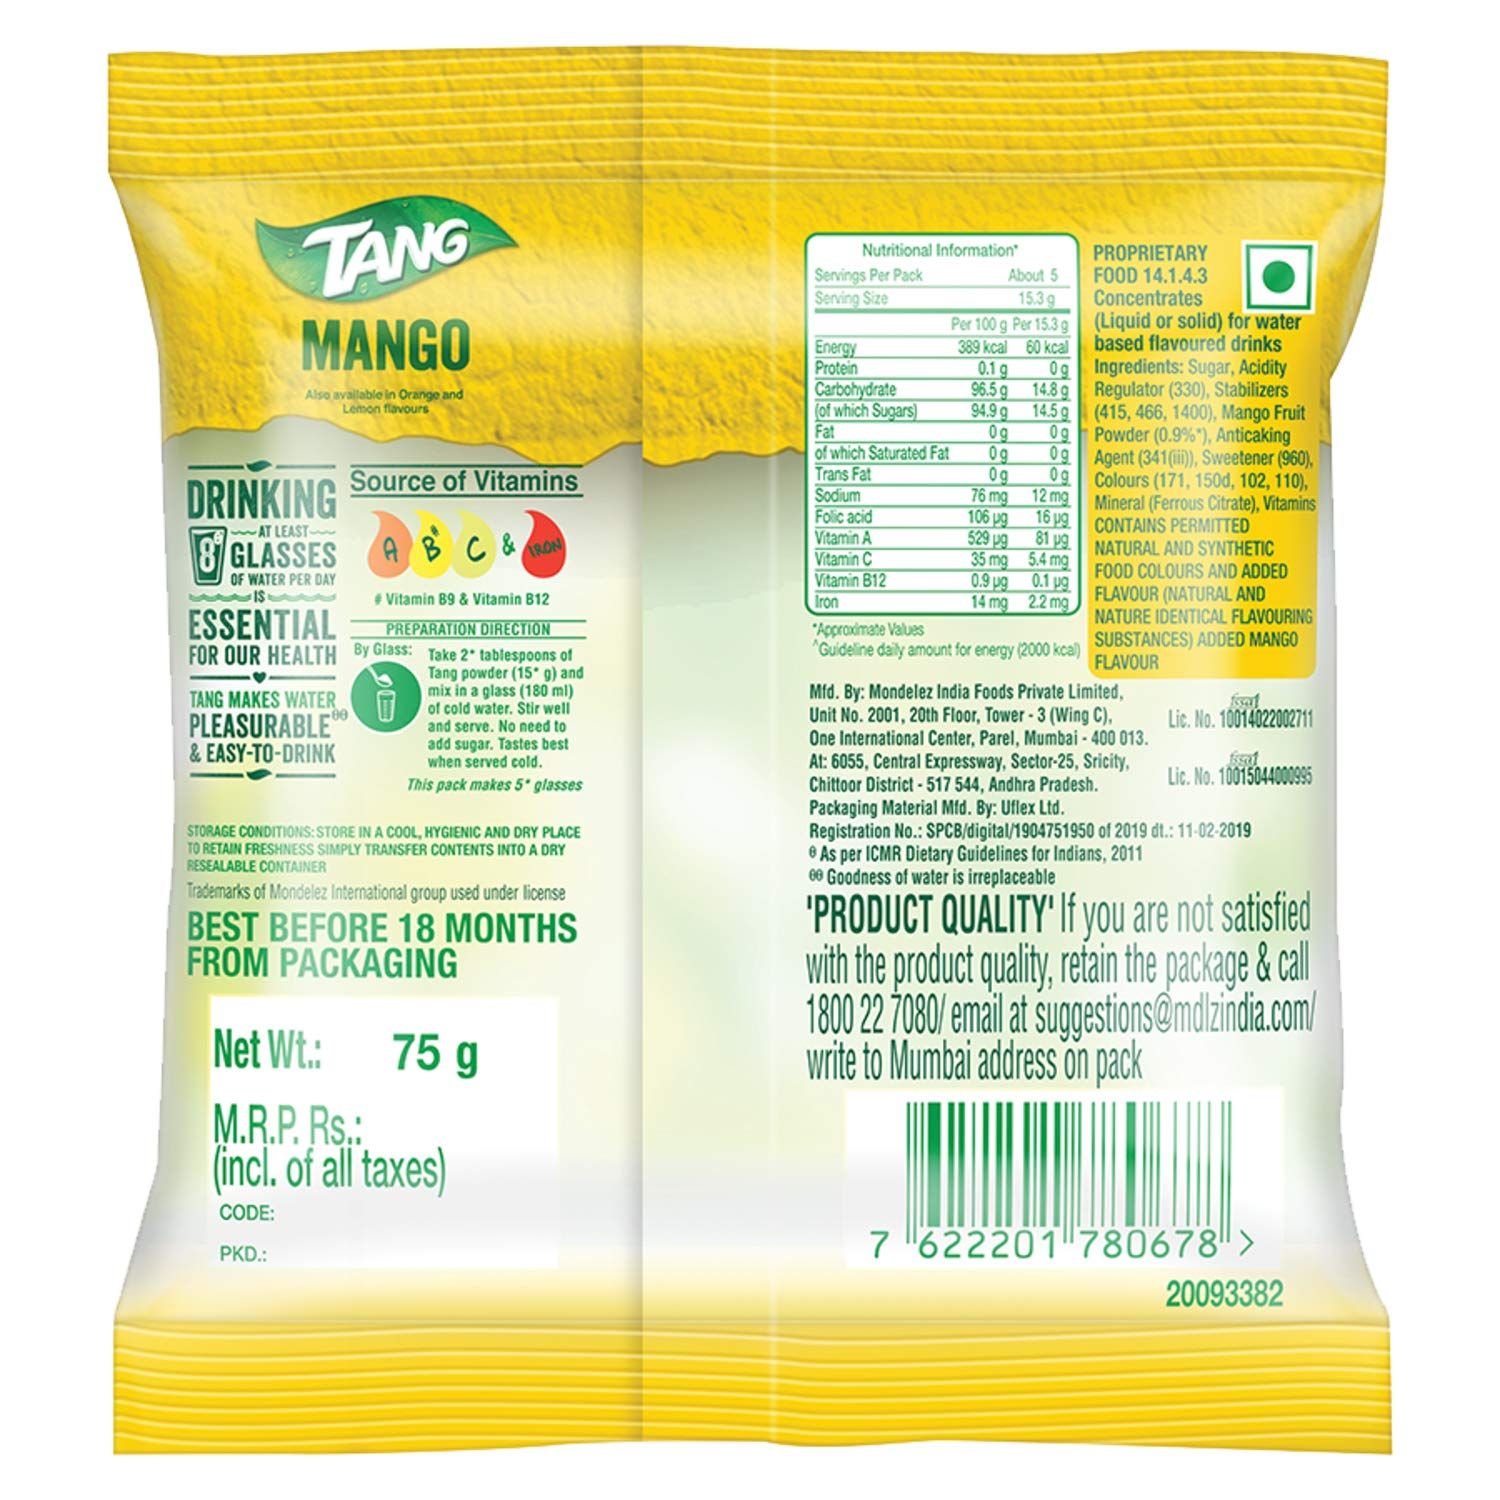 Tang Mango Instant Drink Mix Image